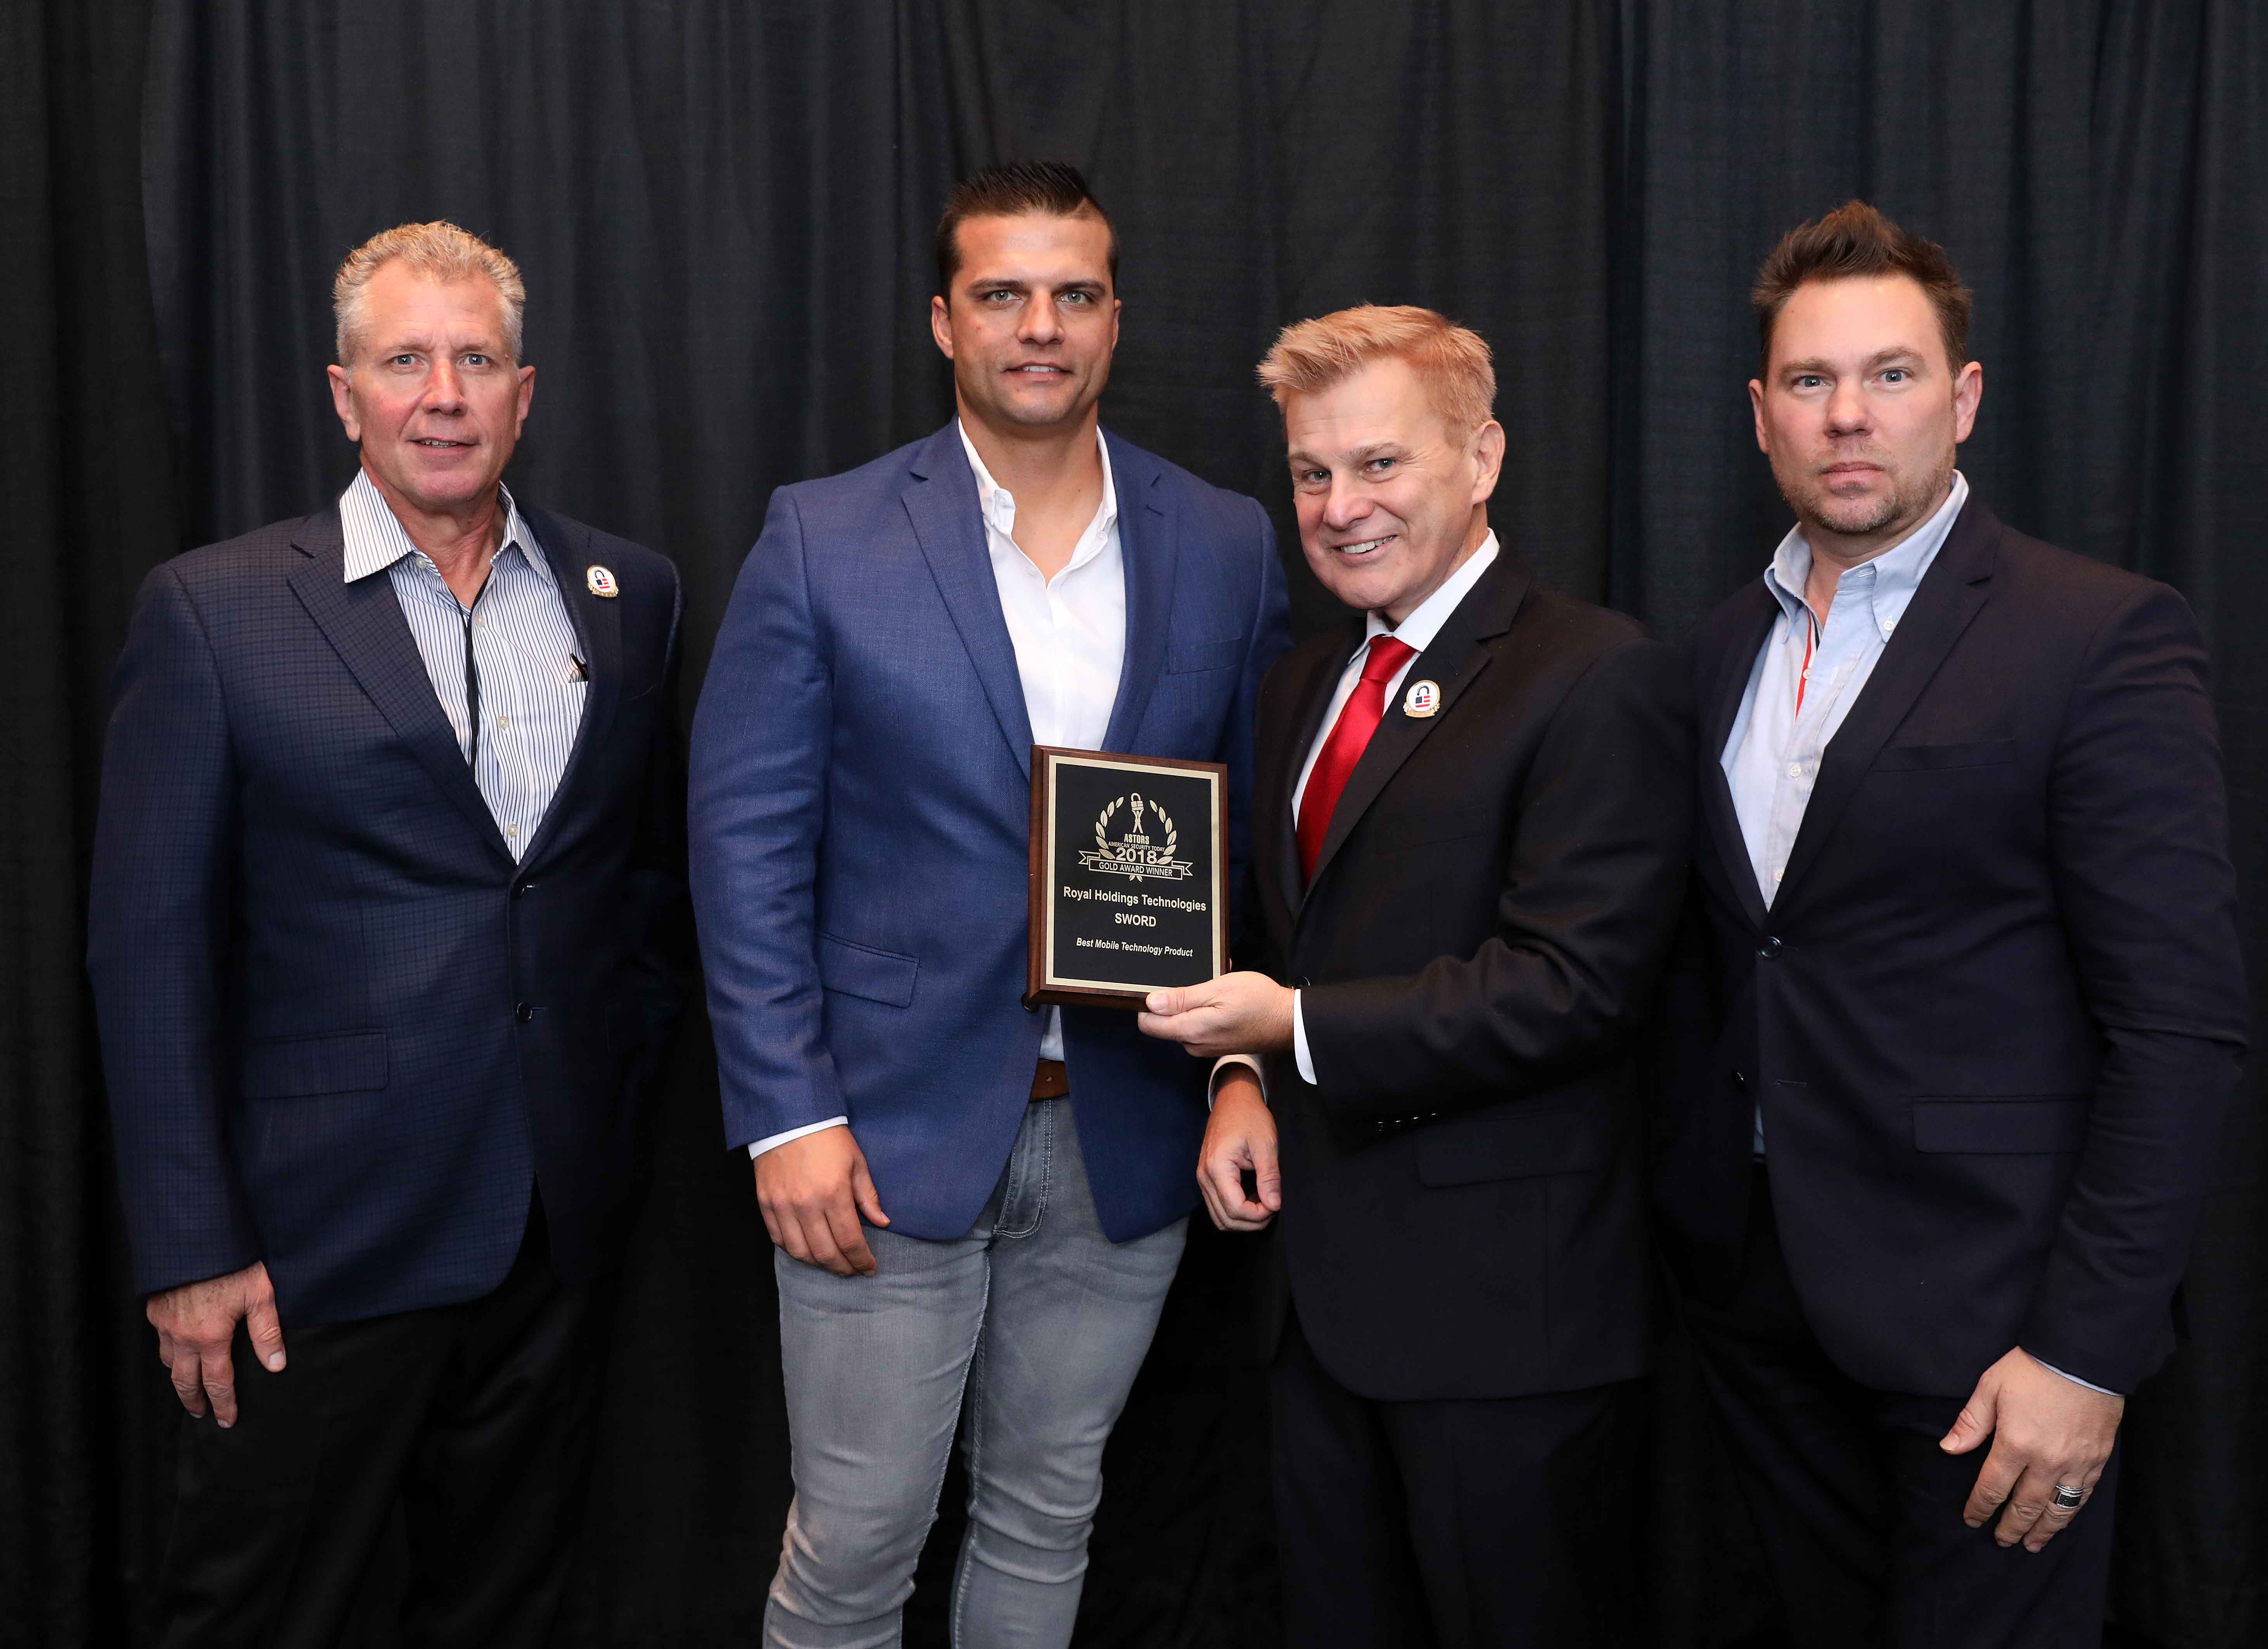 Chuck Bloomquist, Chief Technical Advisor, (left to right) Barry Oberholzer, Chief Executive Officer, and Jaromy Pittario, Chief Operating Officer of Royal Holdings Technologies accepting one of eight record-breaking 2018 ‘ASTORS’ Awards for the company’s SWORD Smartphone Security Scanning Devices.